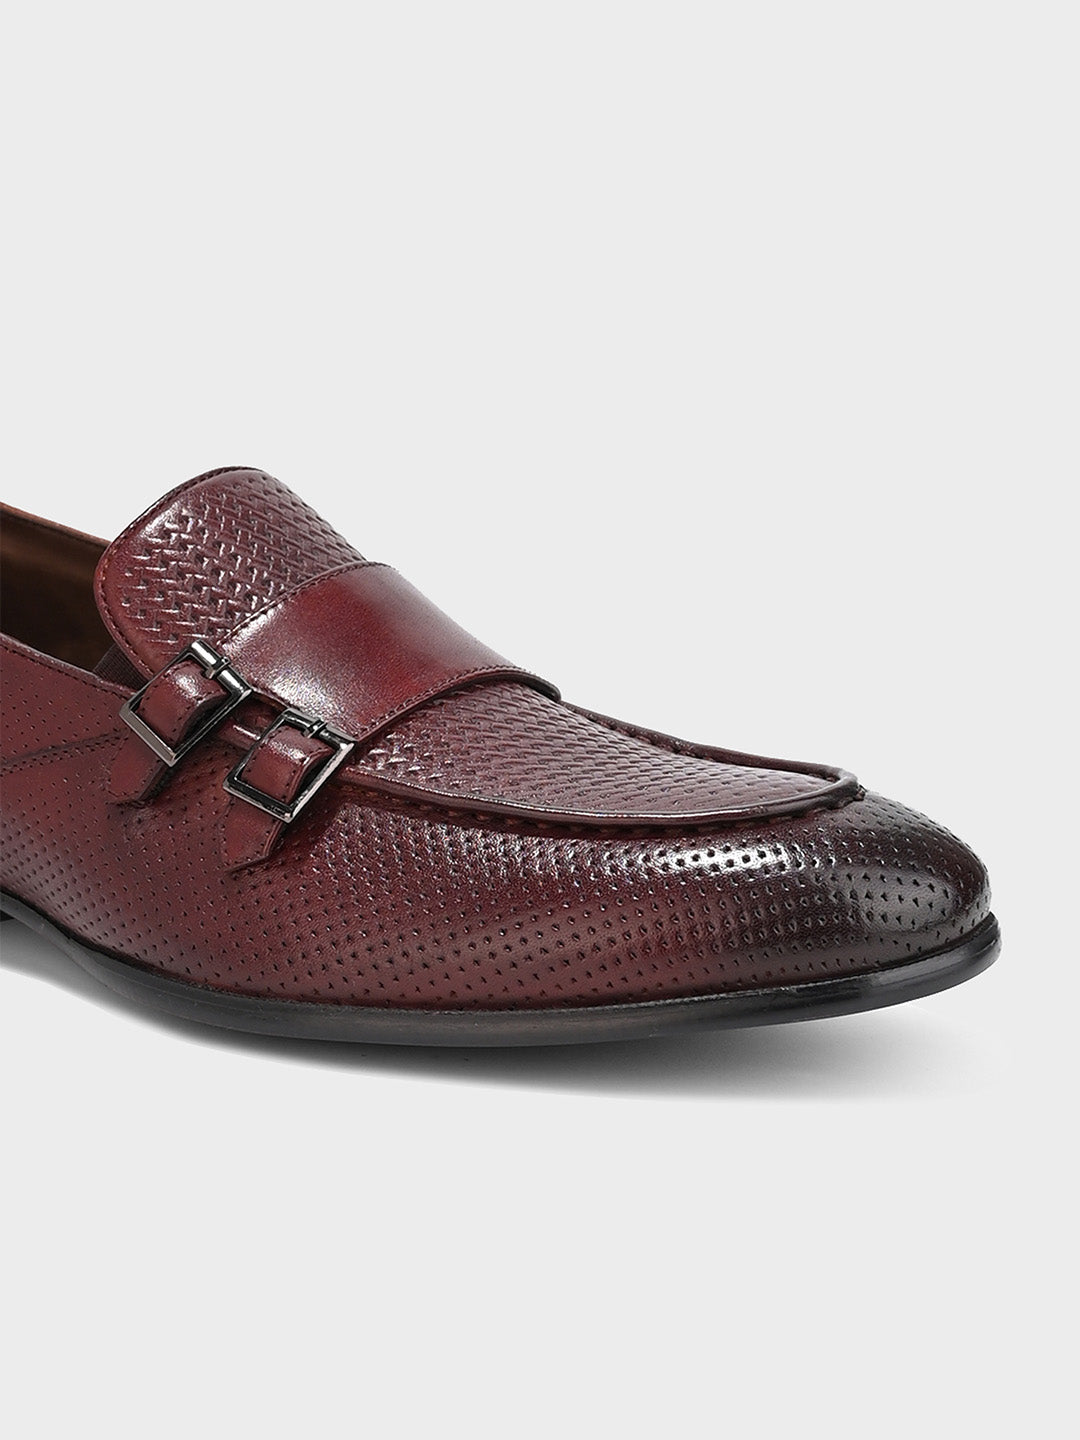 Men's Brown Leather Monk Strap Slip-On Shoes